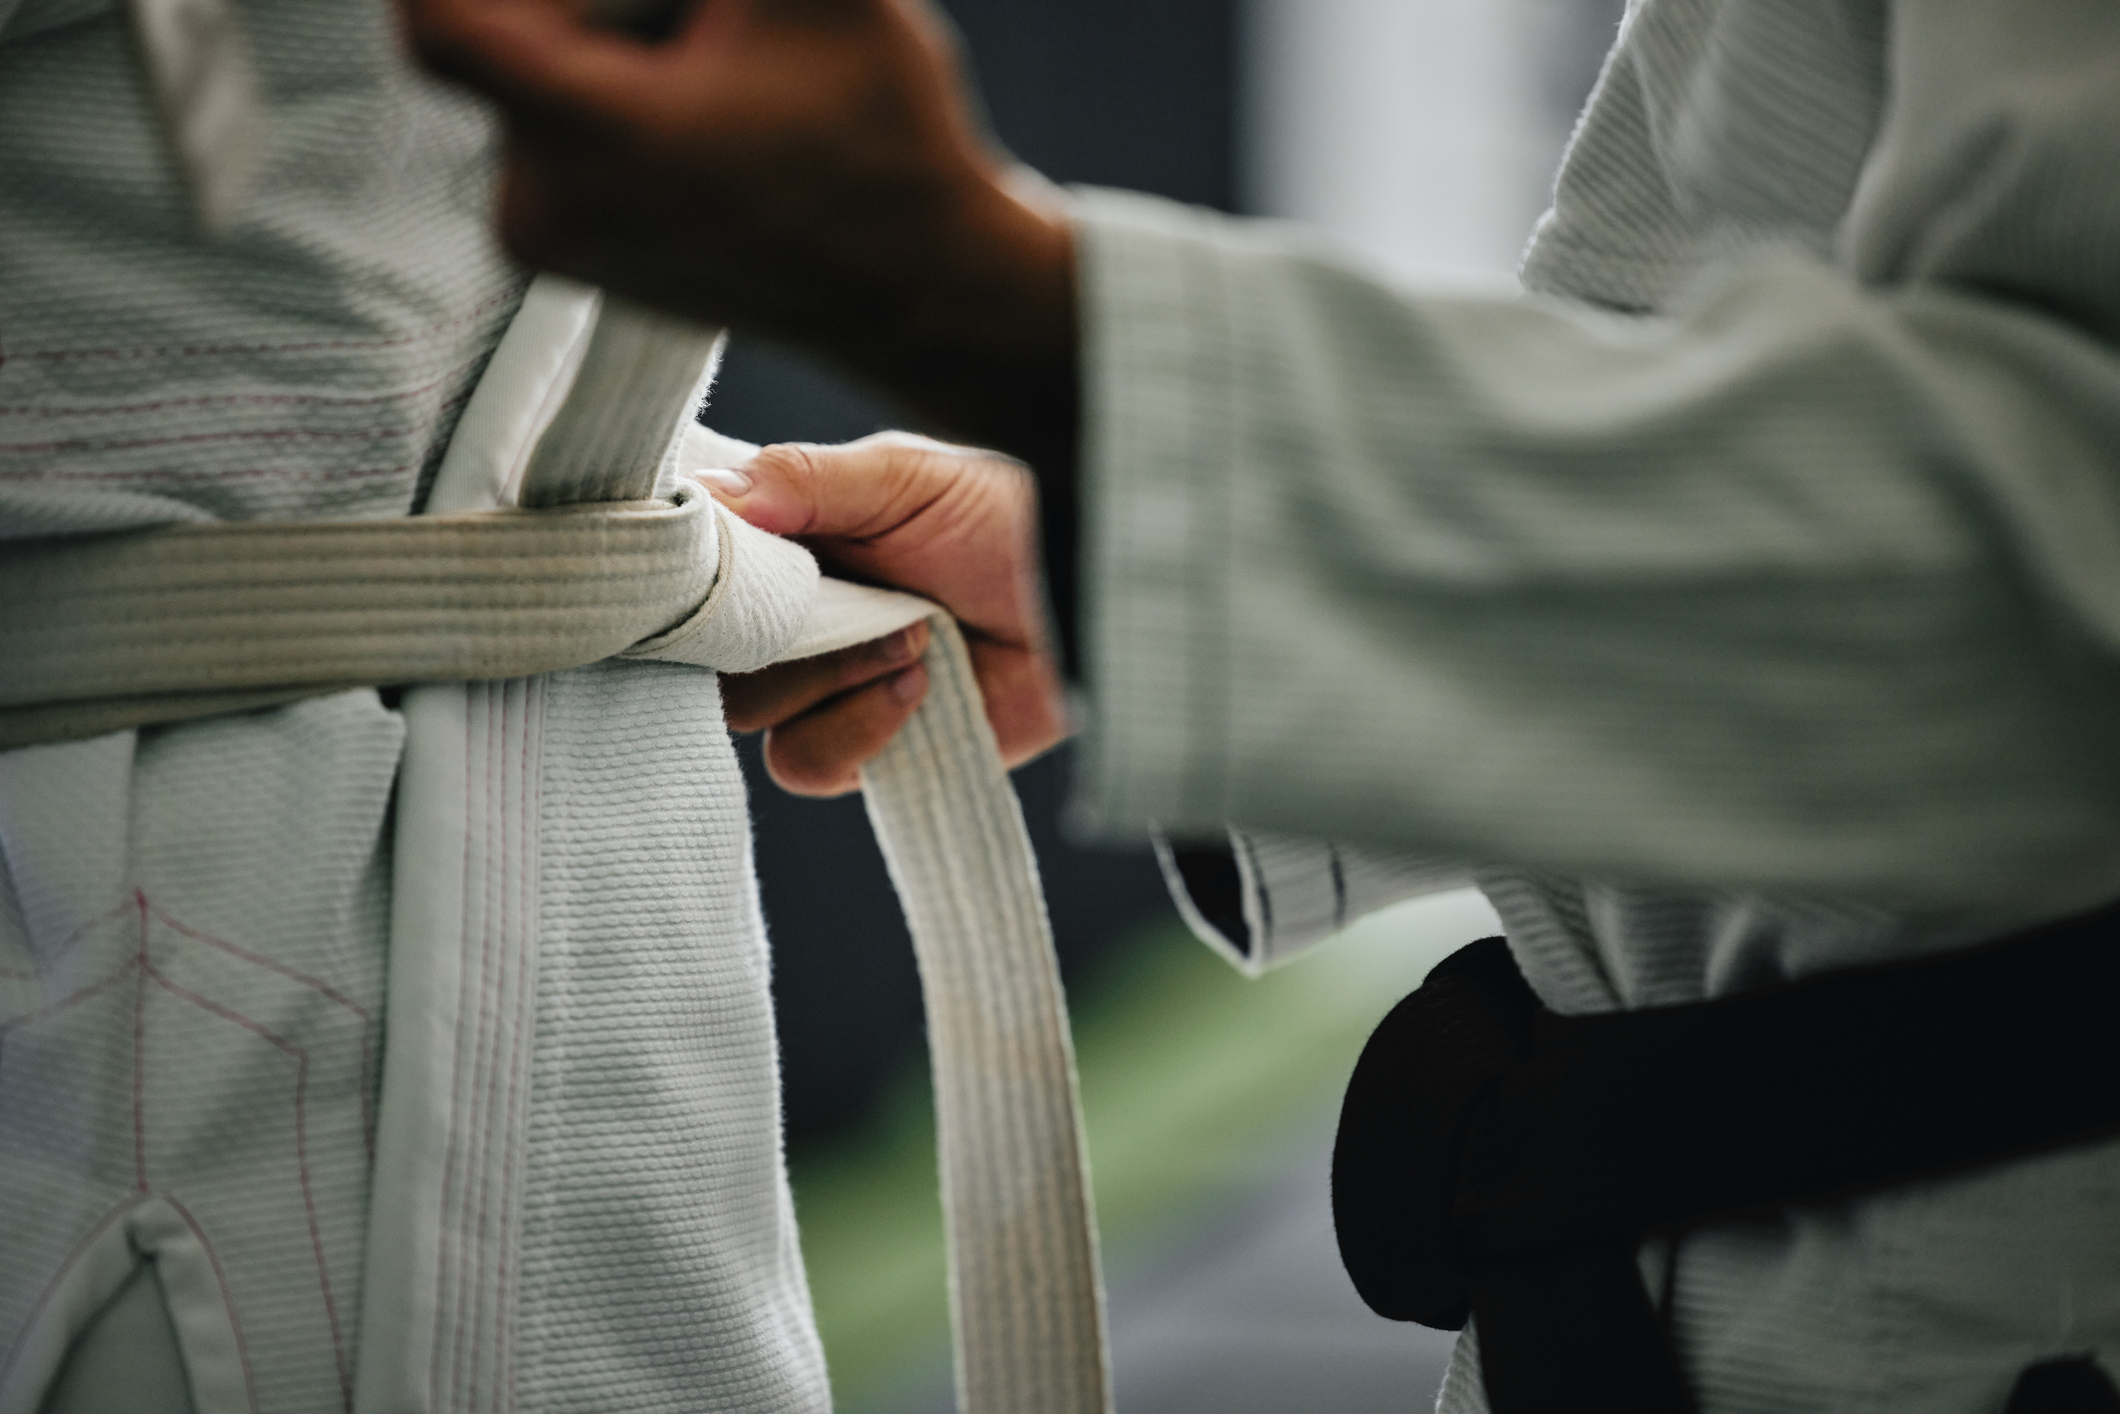 Karate learning, training and workout of a sport student and coach getting ready for a fight class. Defense expert hands tie a belt in a dojo, workout studio or wellness club about to work on fitness